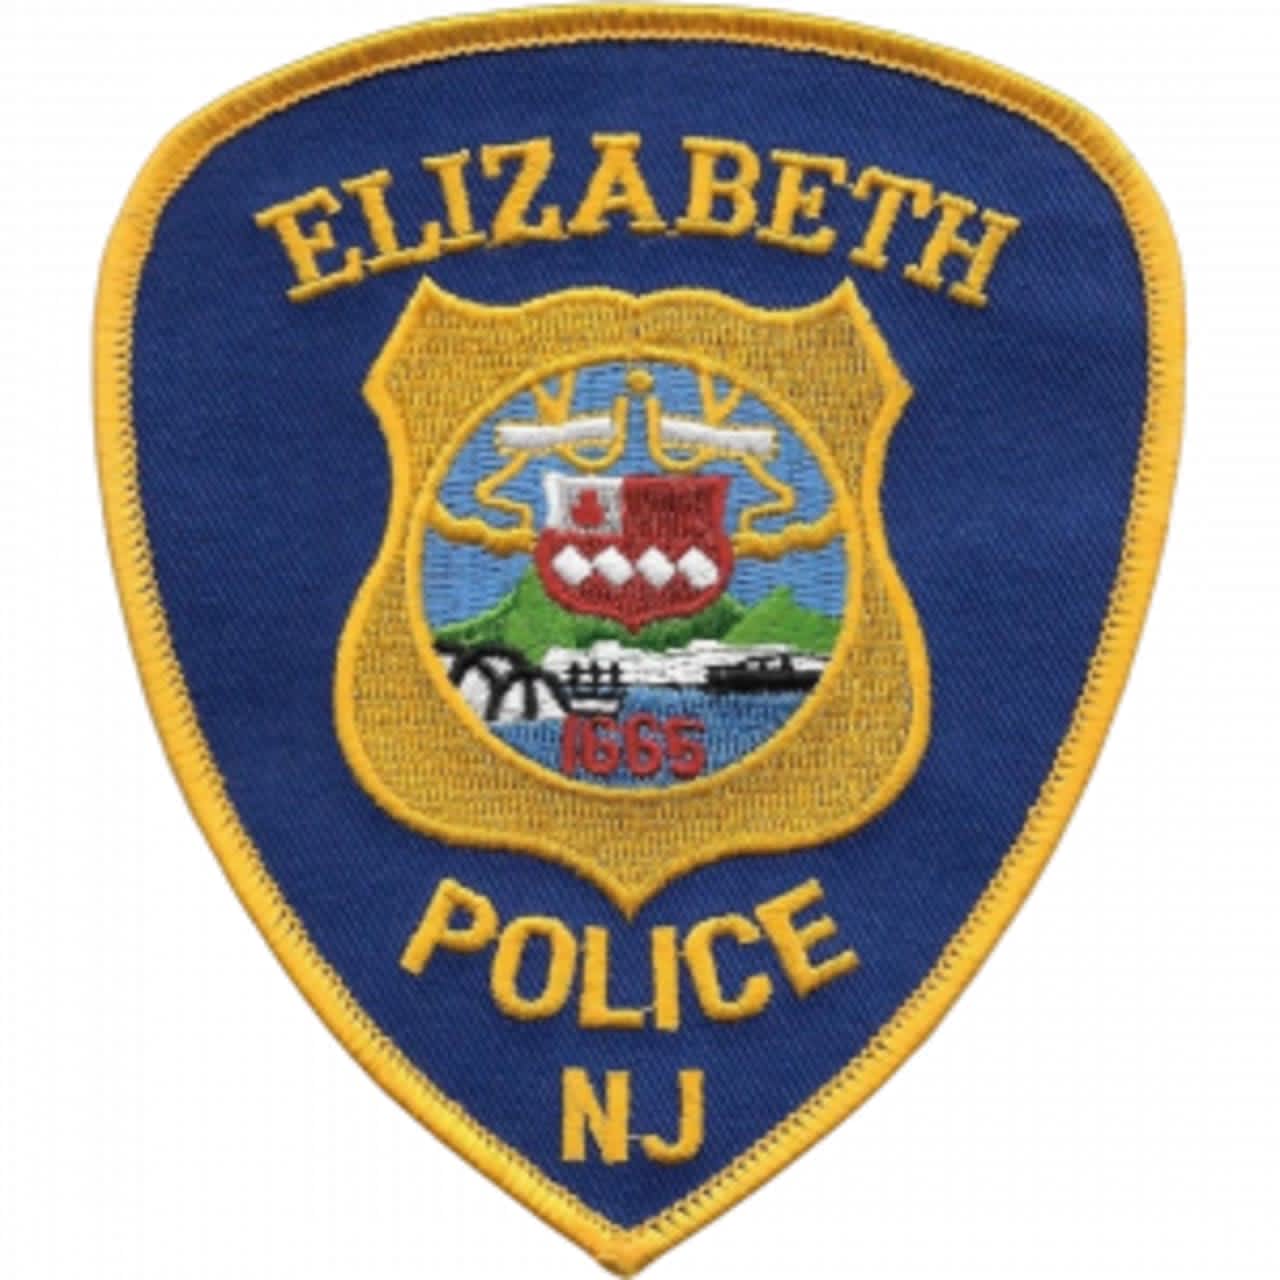 The director of the Elizabeth Police Department is reportedly under investigation for using discriminatory language.